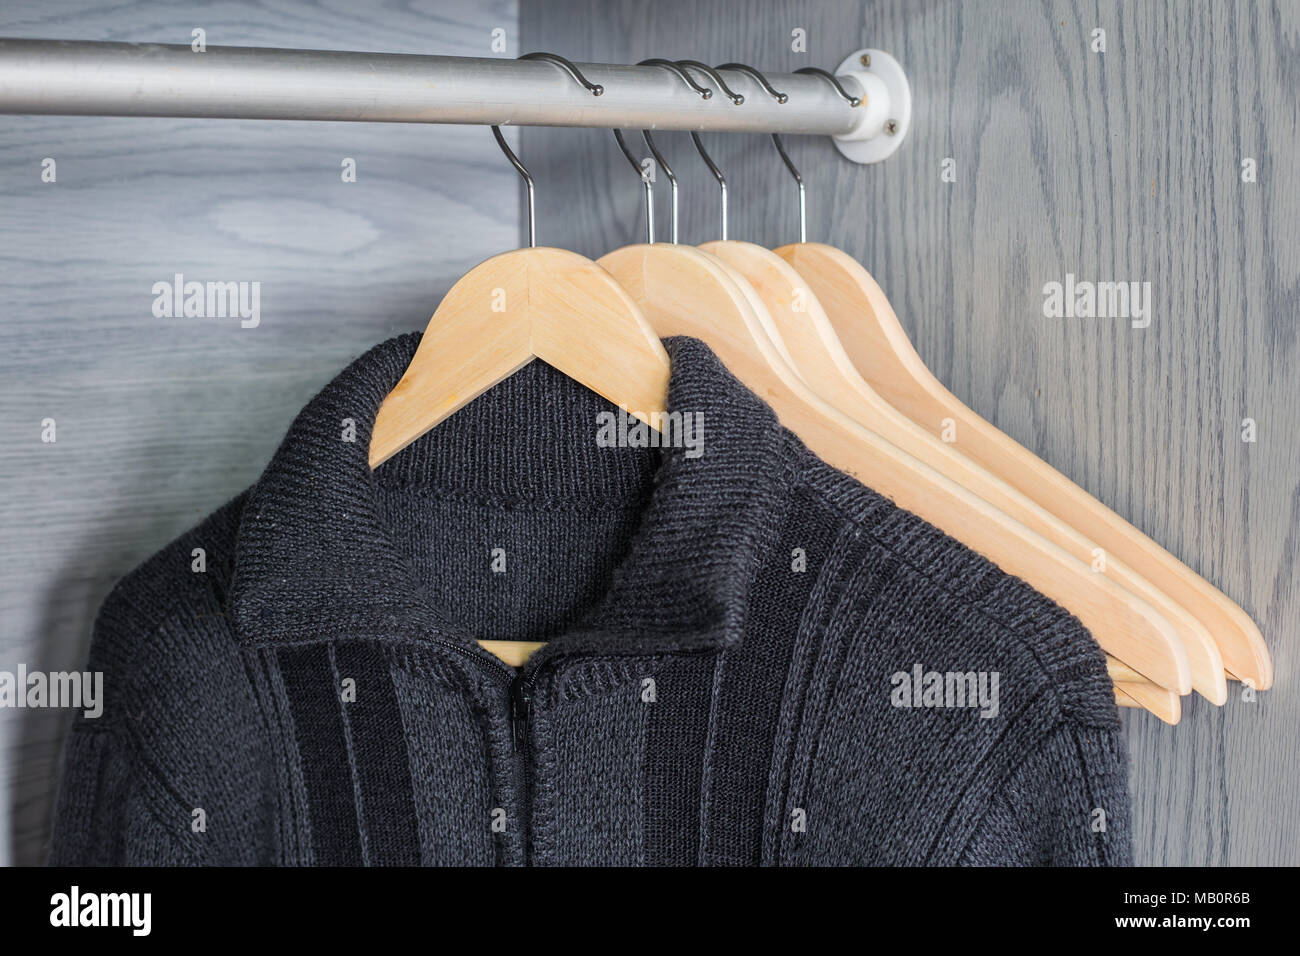 Why the Type of Clothes Hangers You Use Actually Matters